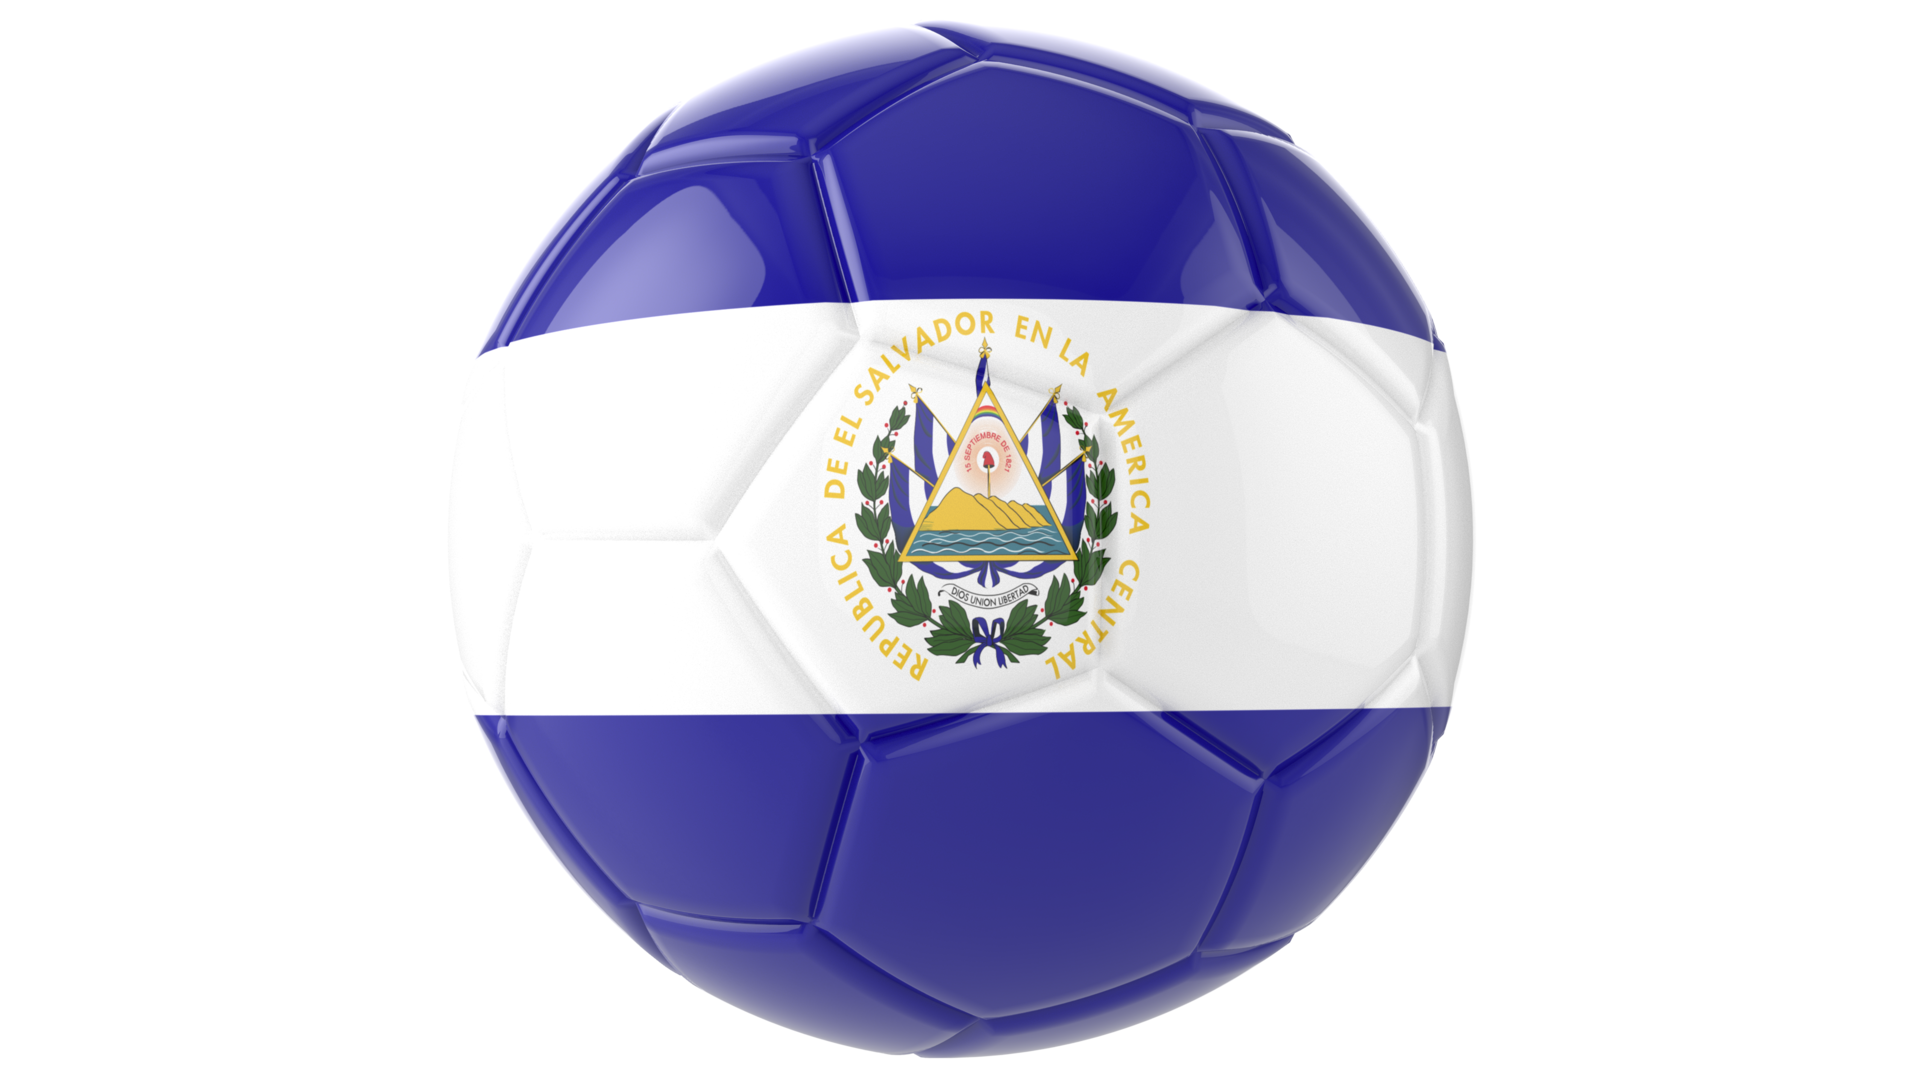 Free 3d realistic soccer ball with the flag of El Salvador on it isolated  on transparent PNG background 13869297 PNG with Transparent Background